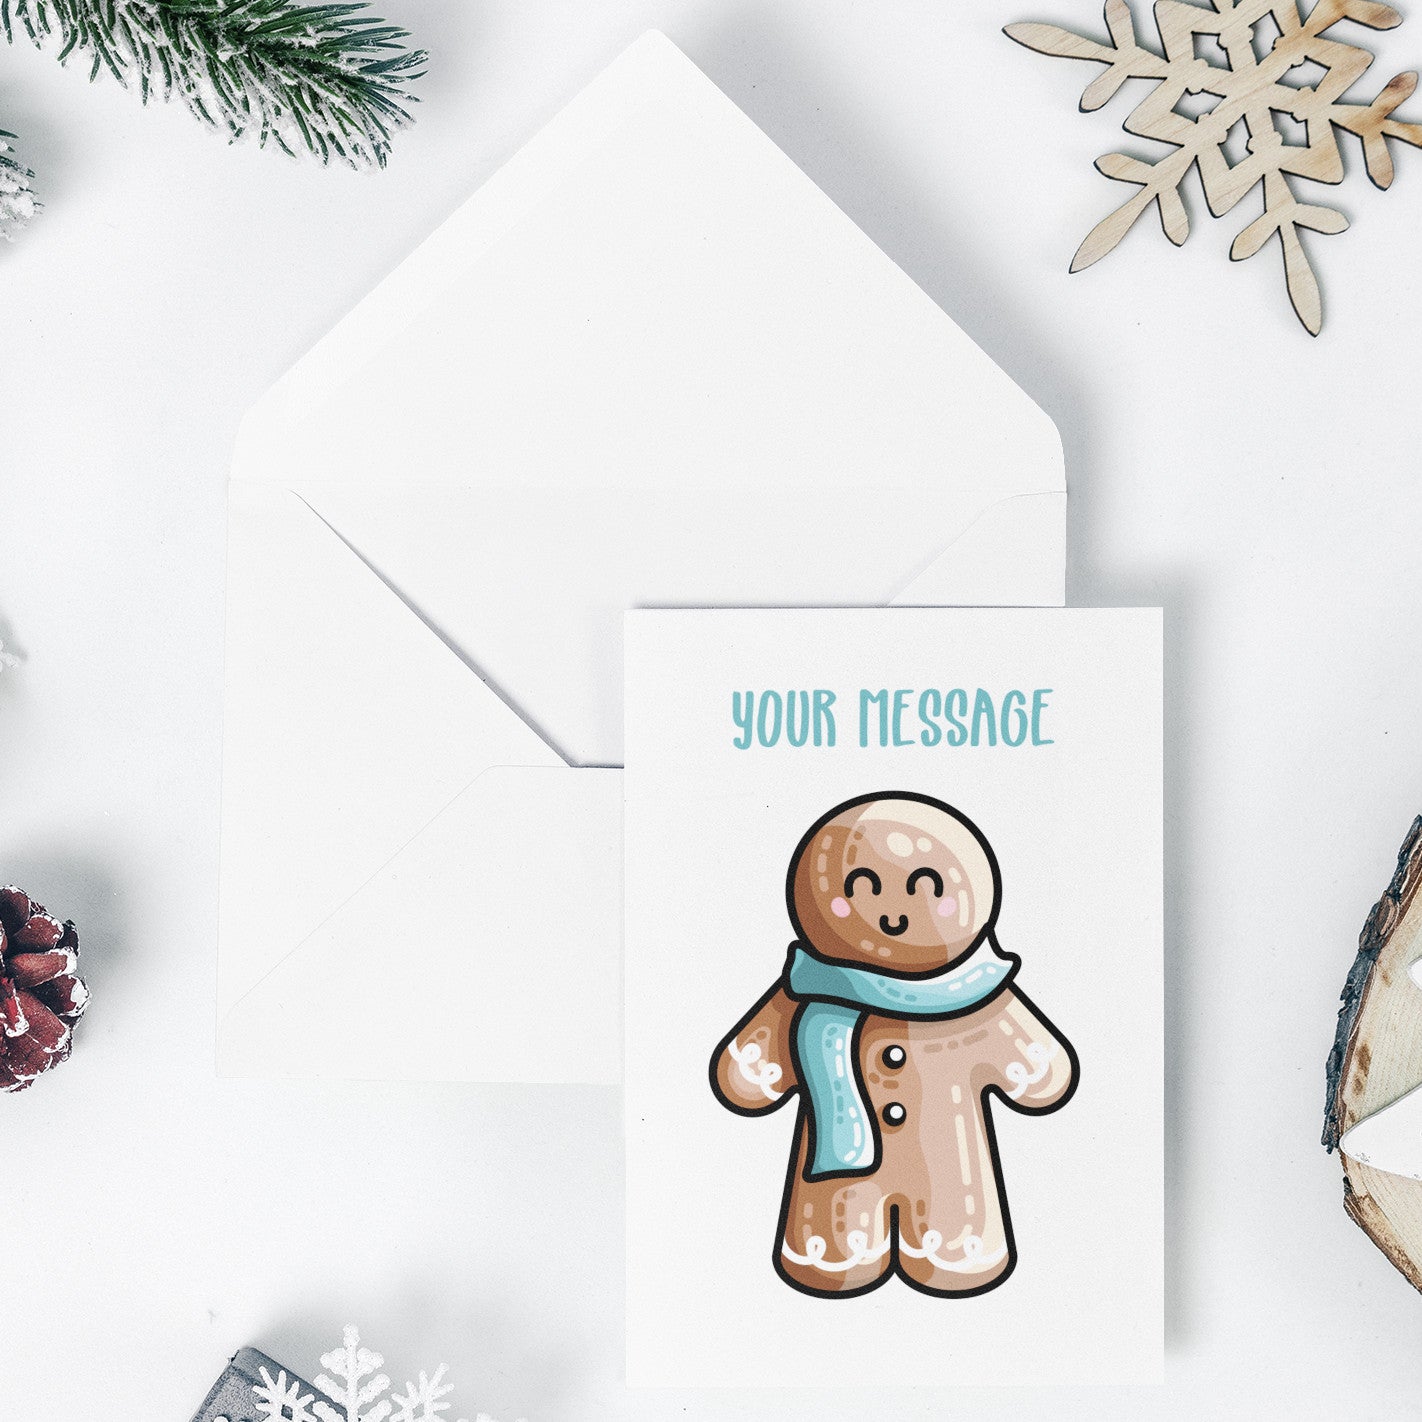 An open white envelope beneath a white greeting card with a design of a kawaii cute gingerbread person wearing a blue scarf